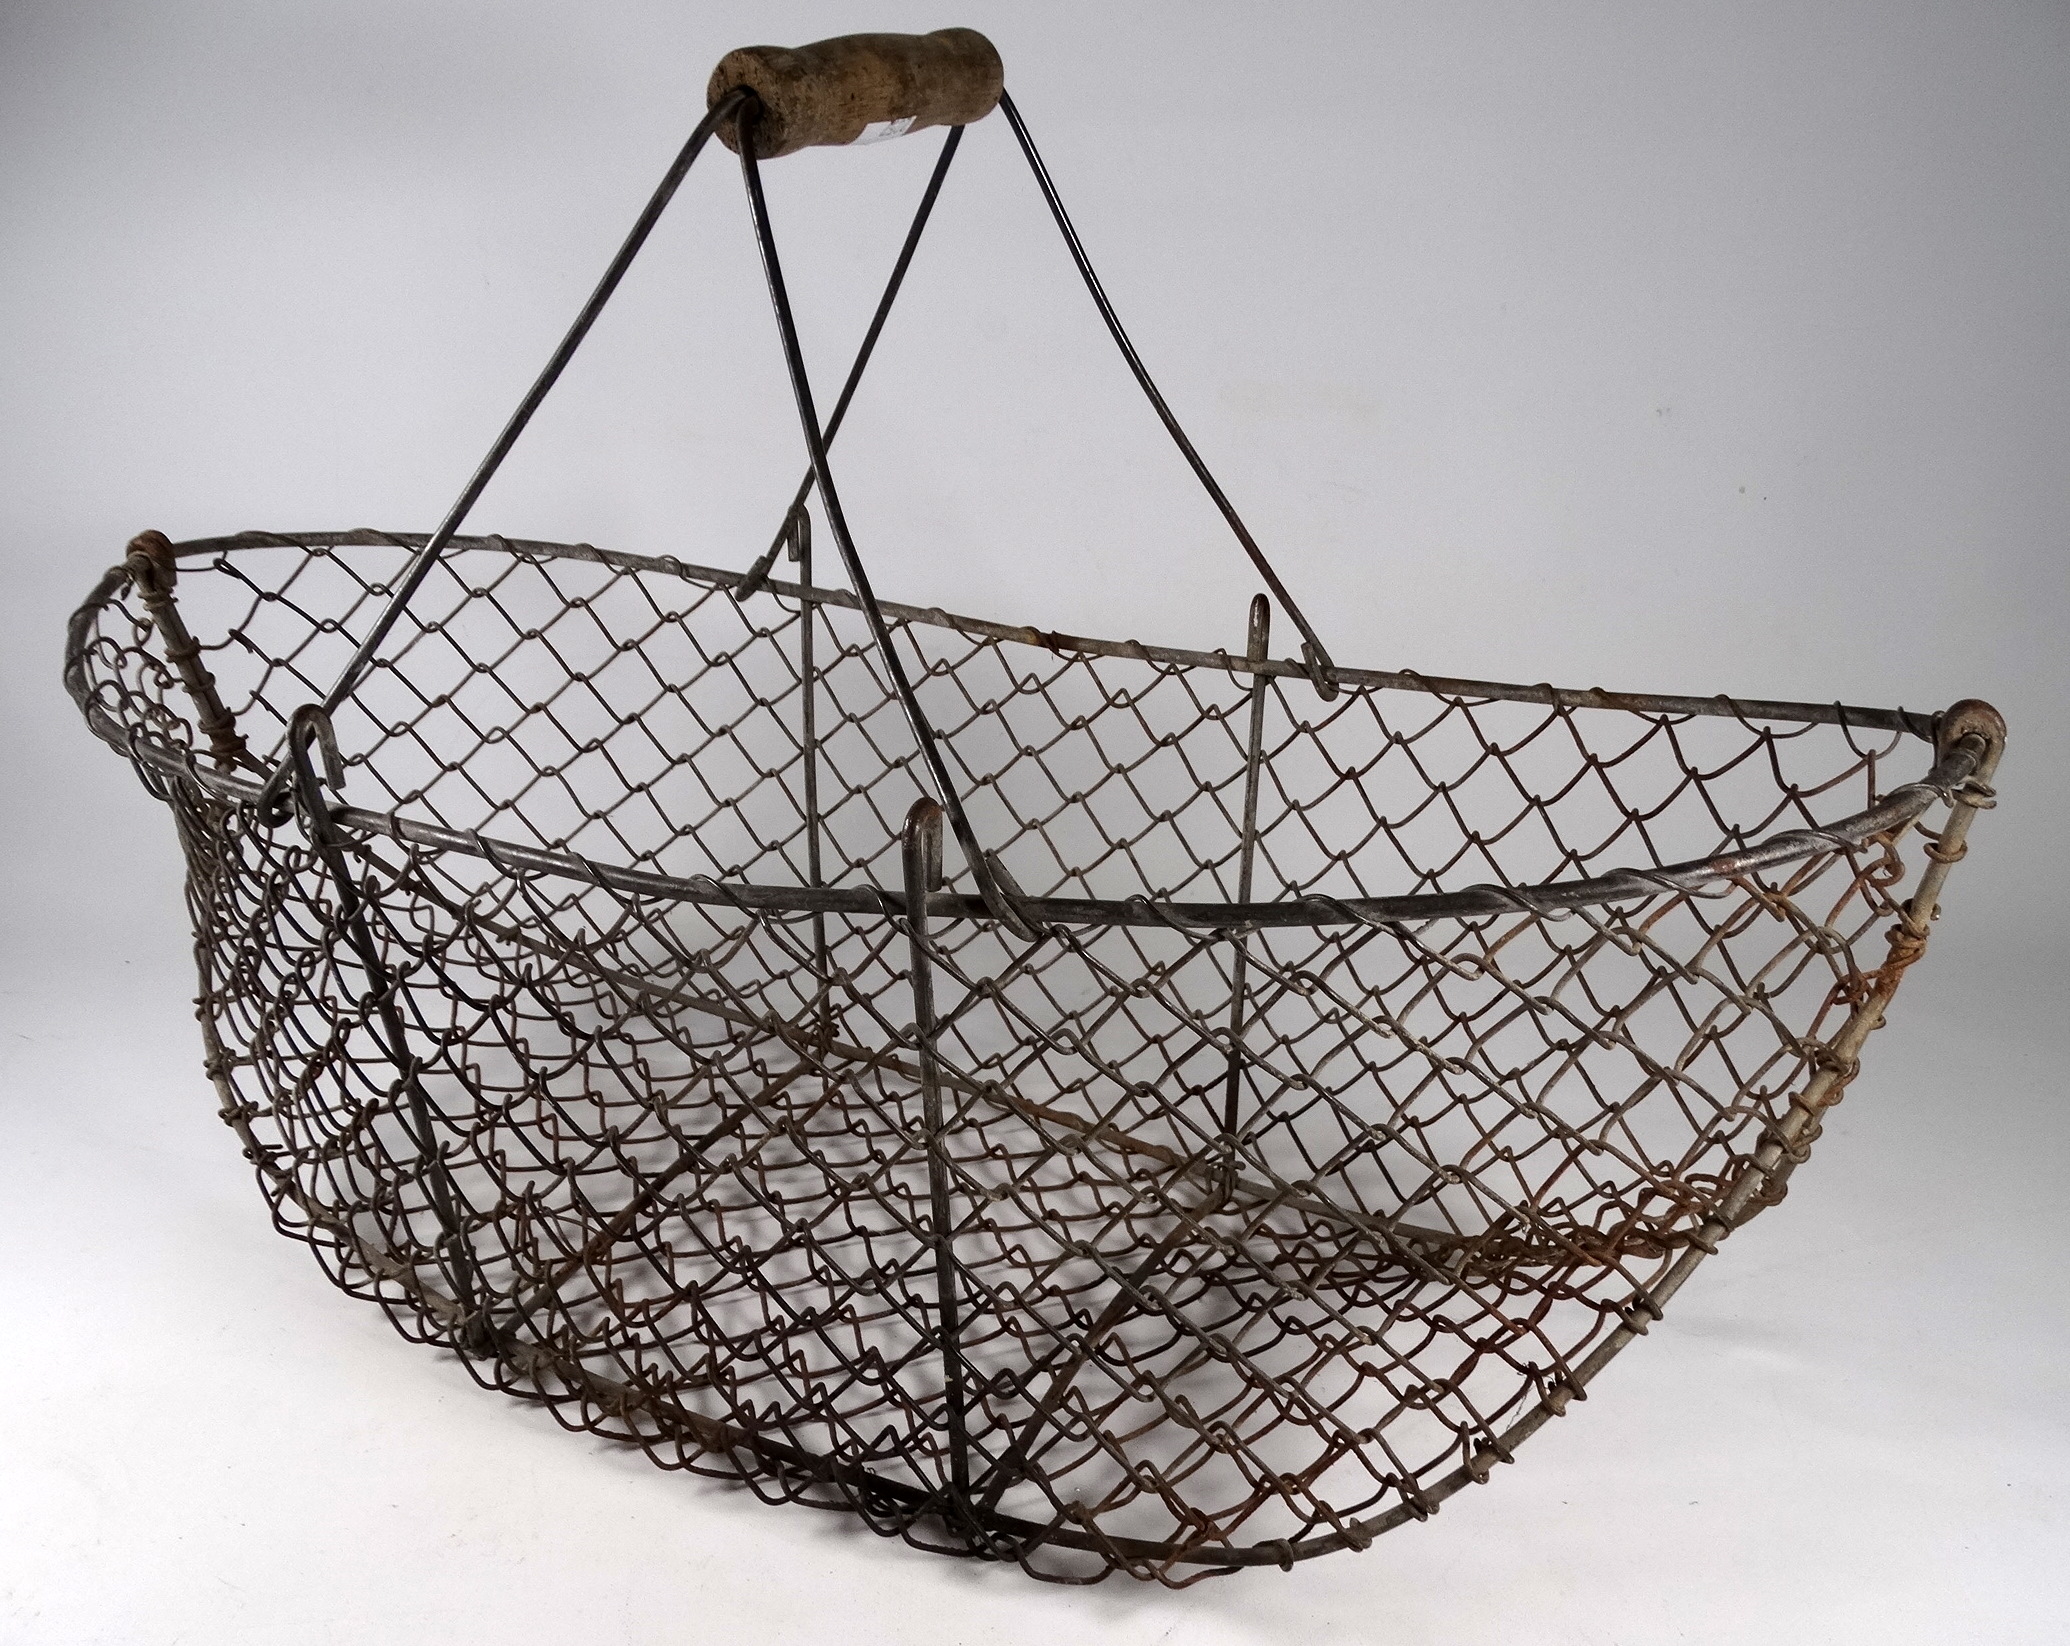 An early 20th century galvanised wire egg basket - of boat form with a turned wooden handle, width